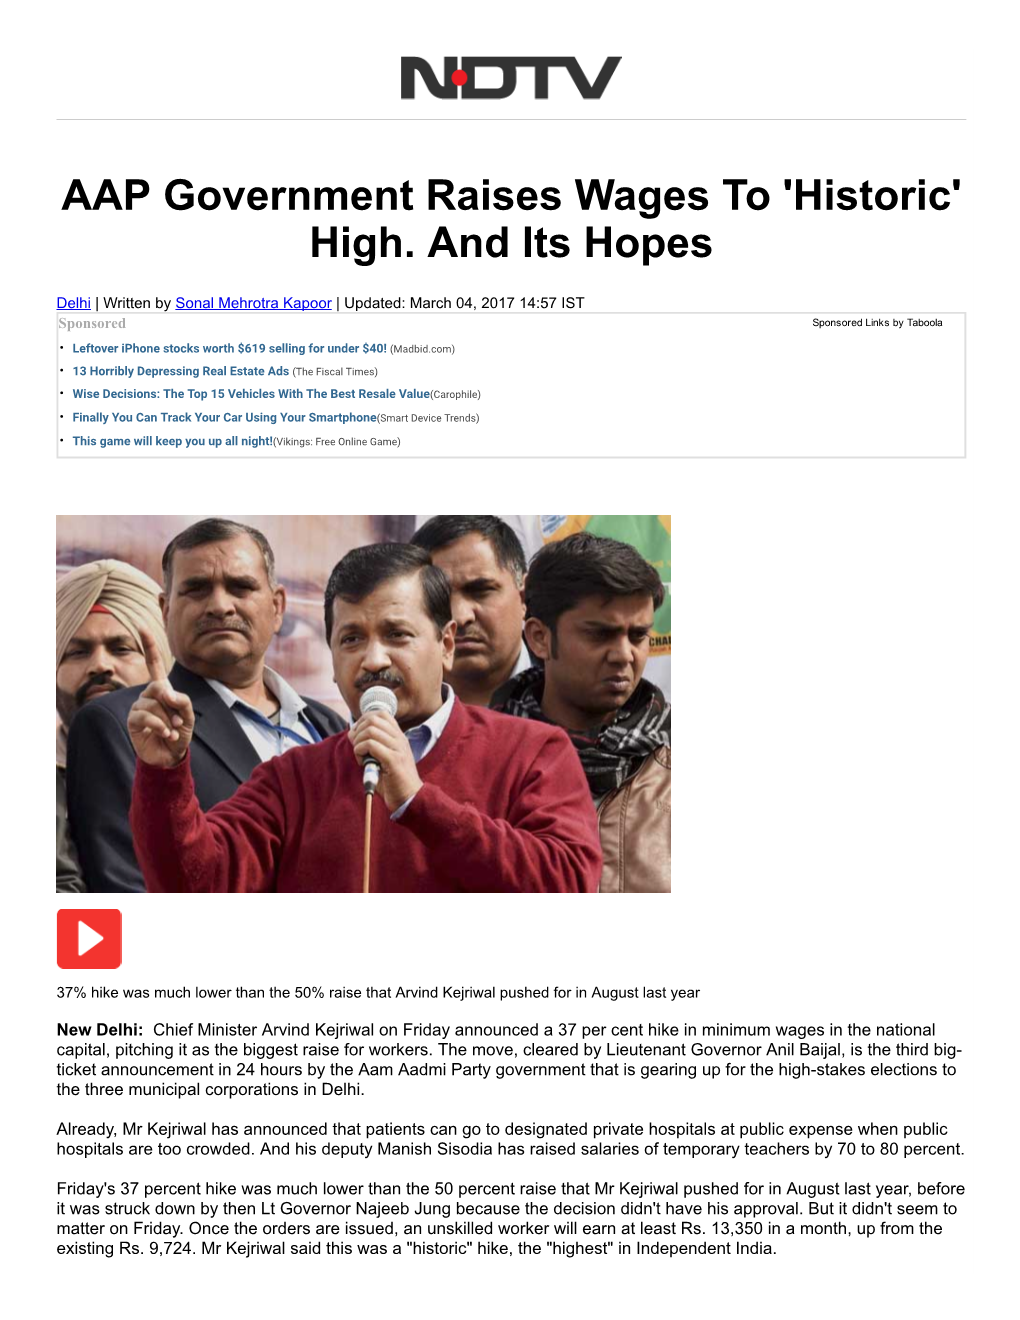 AAP Government Raises Wages to 'Historic' High. and Its Hopes